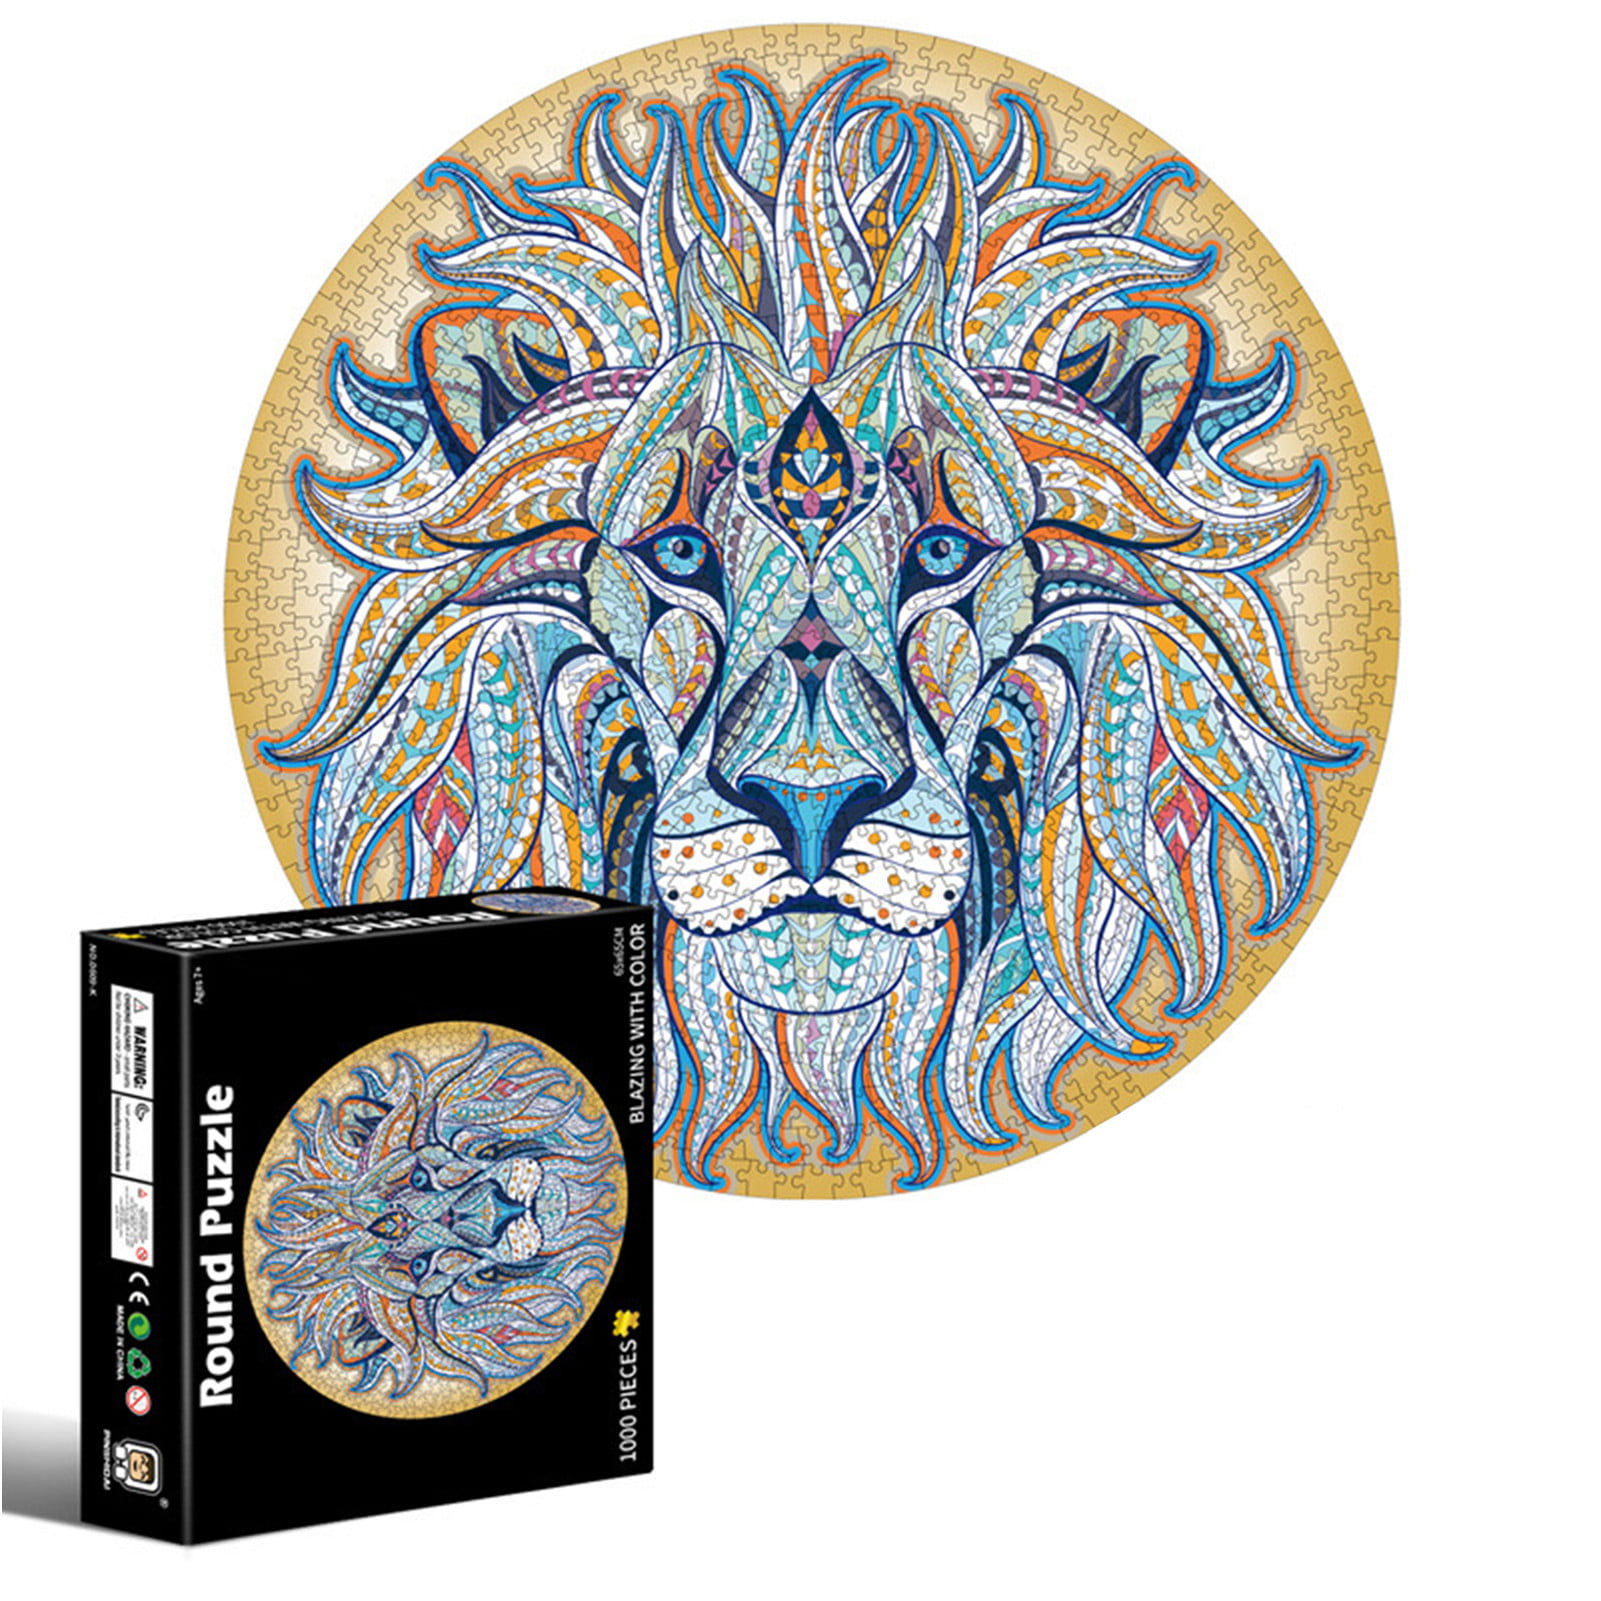 4000 Pieces Wooden Animal Puzzle for Adults-Thinking Lion-Puzzle Color Challenge Jigsaw Puzzles for Adults and Kids Education Gift